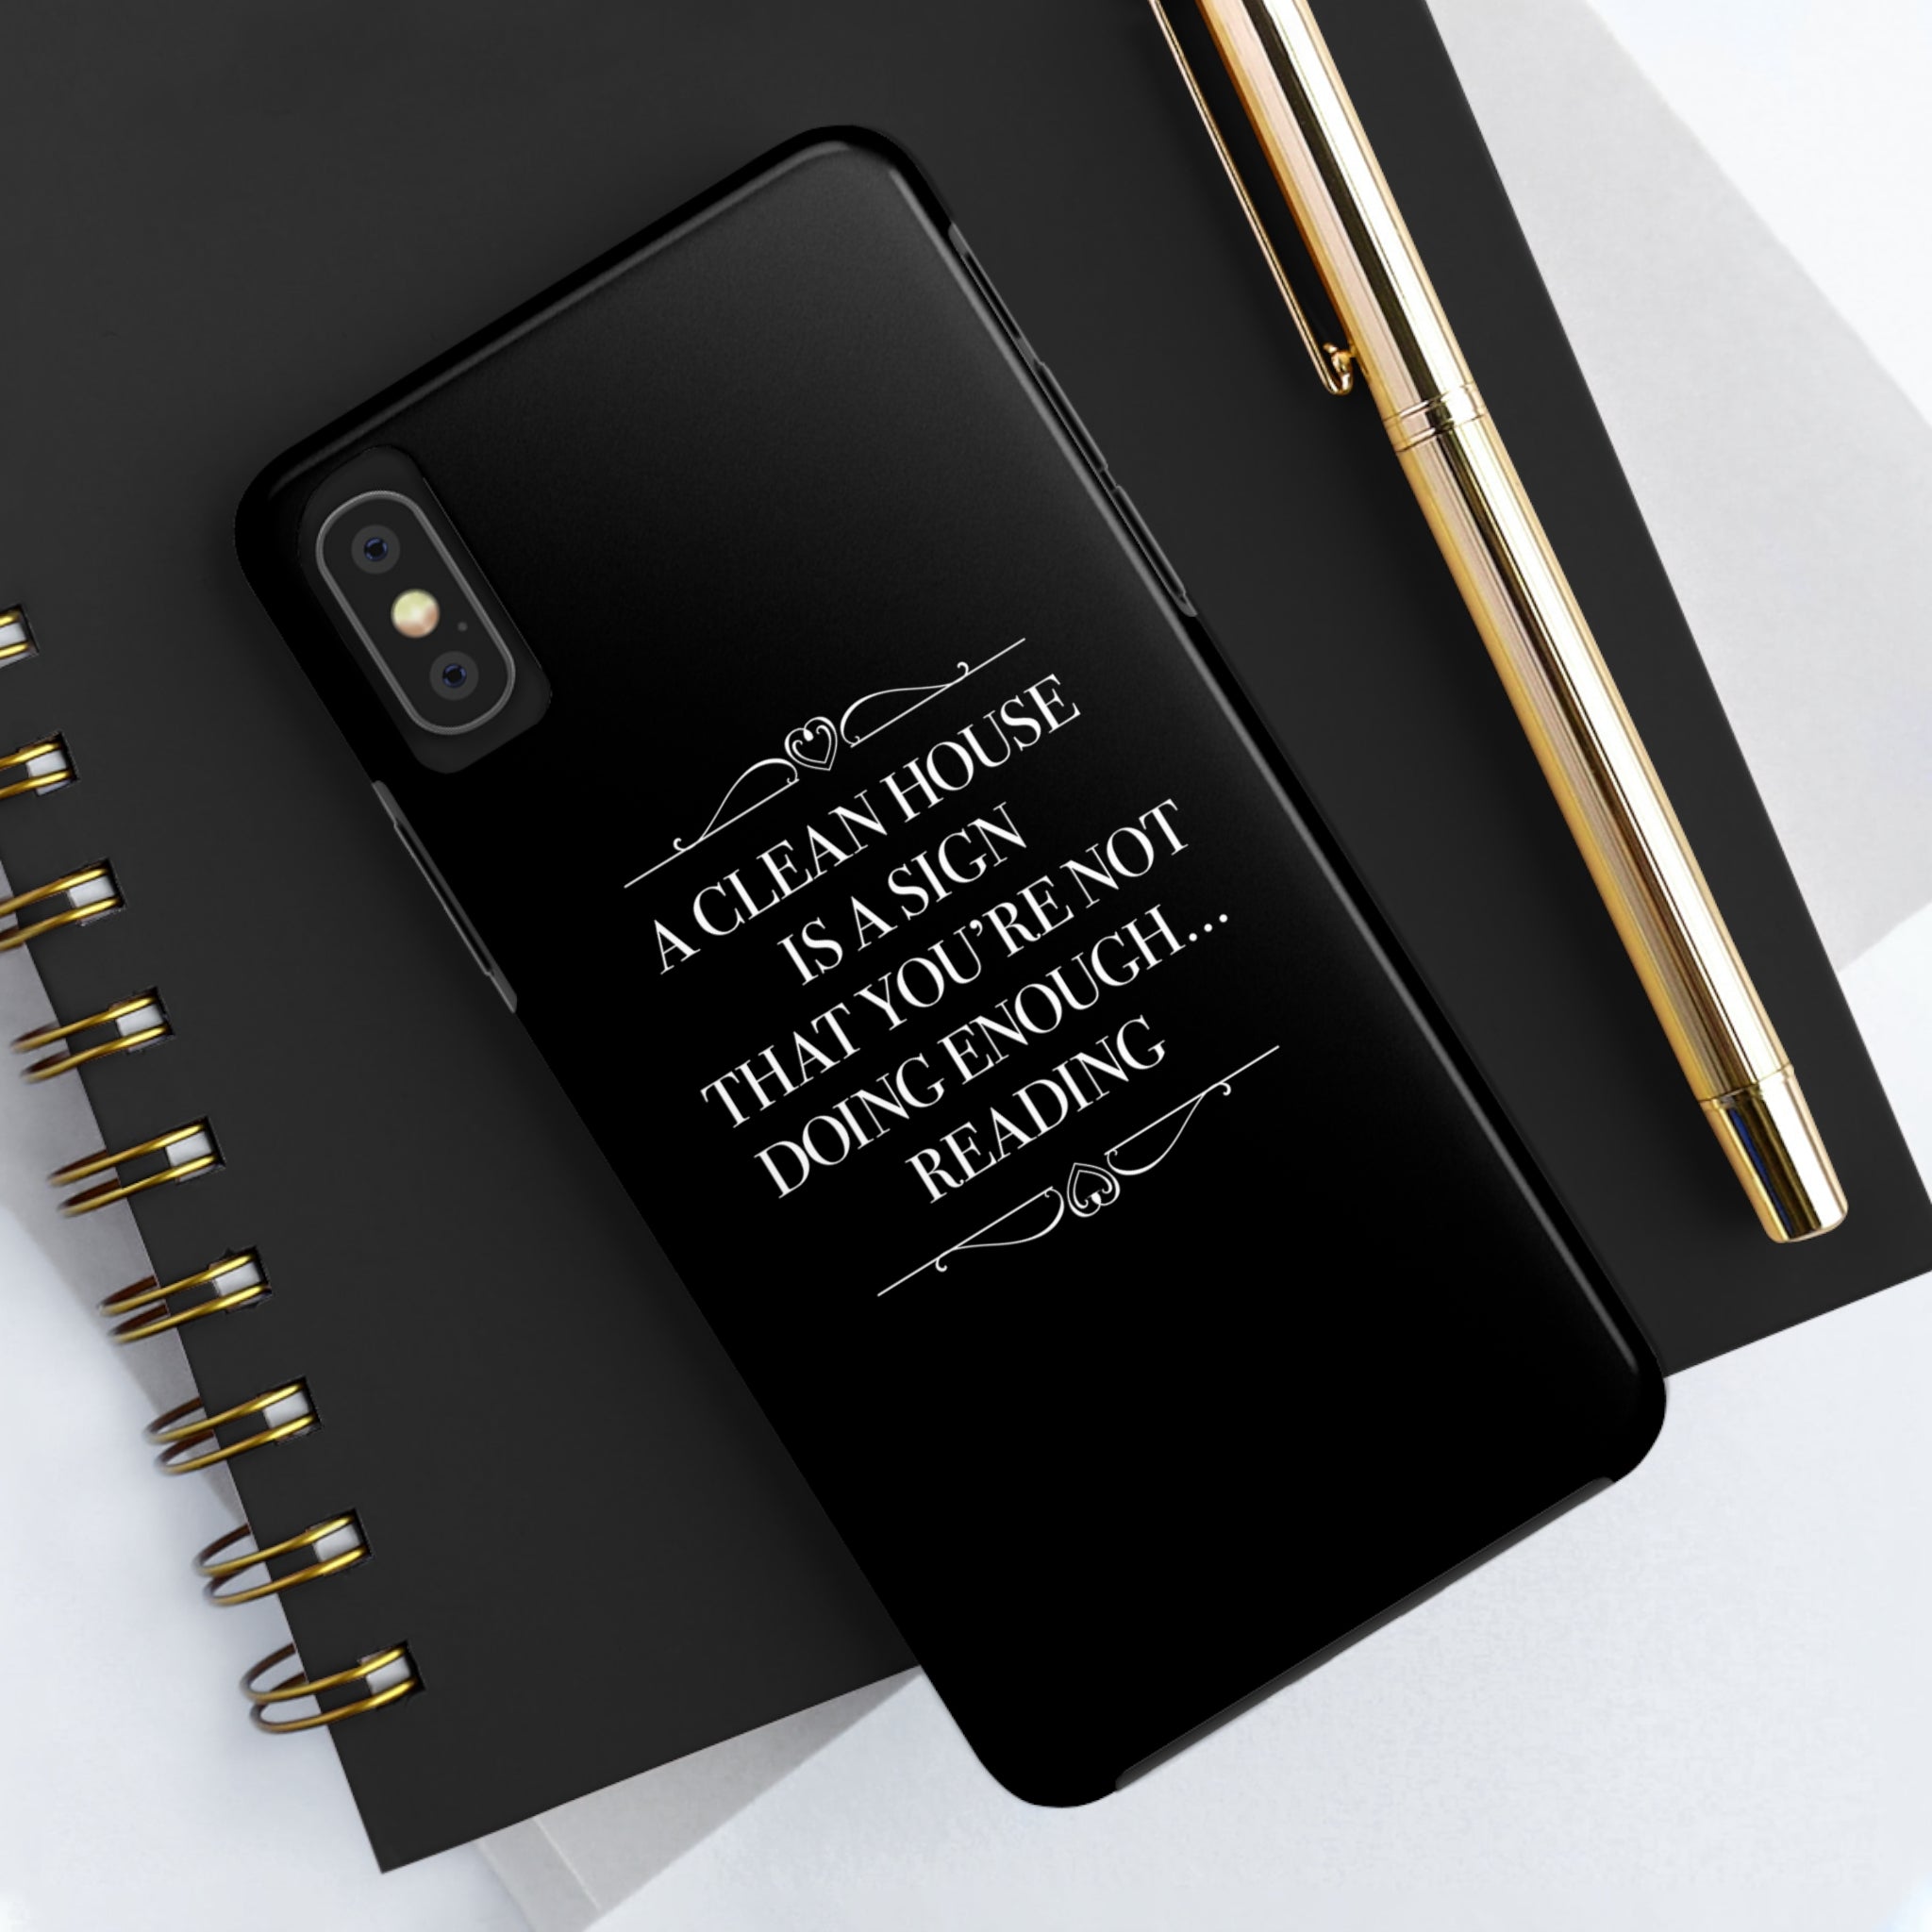 A CLEAN HOUSE Phone Case - Literary Lifestyle Company